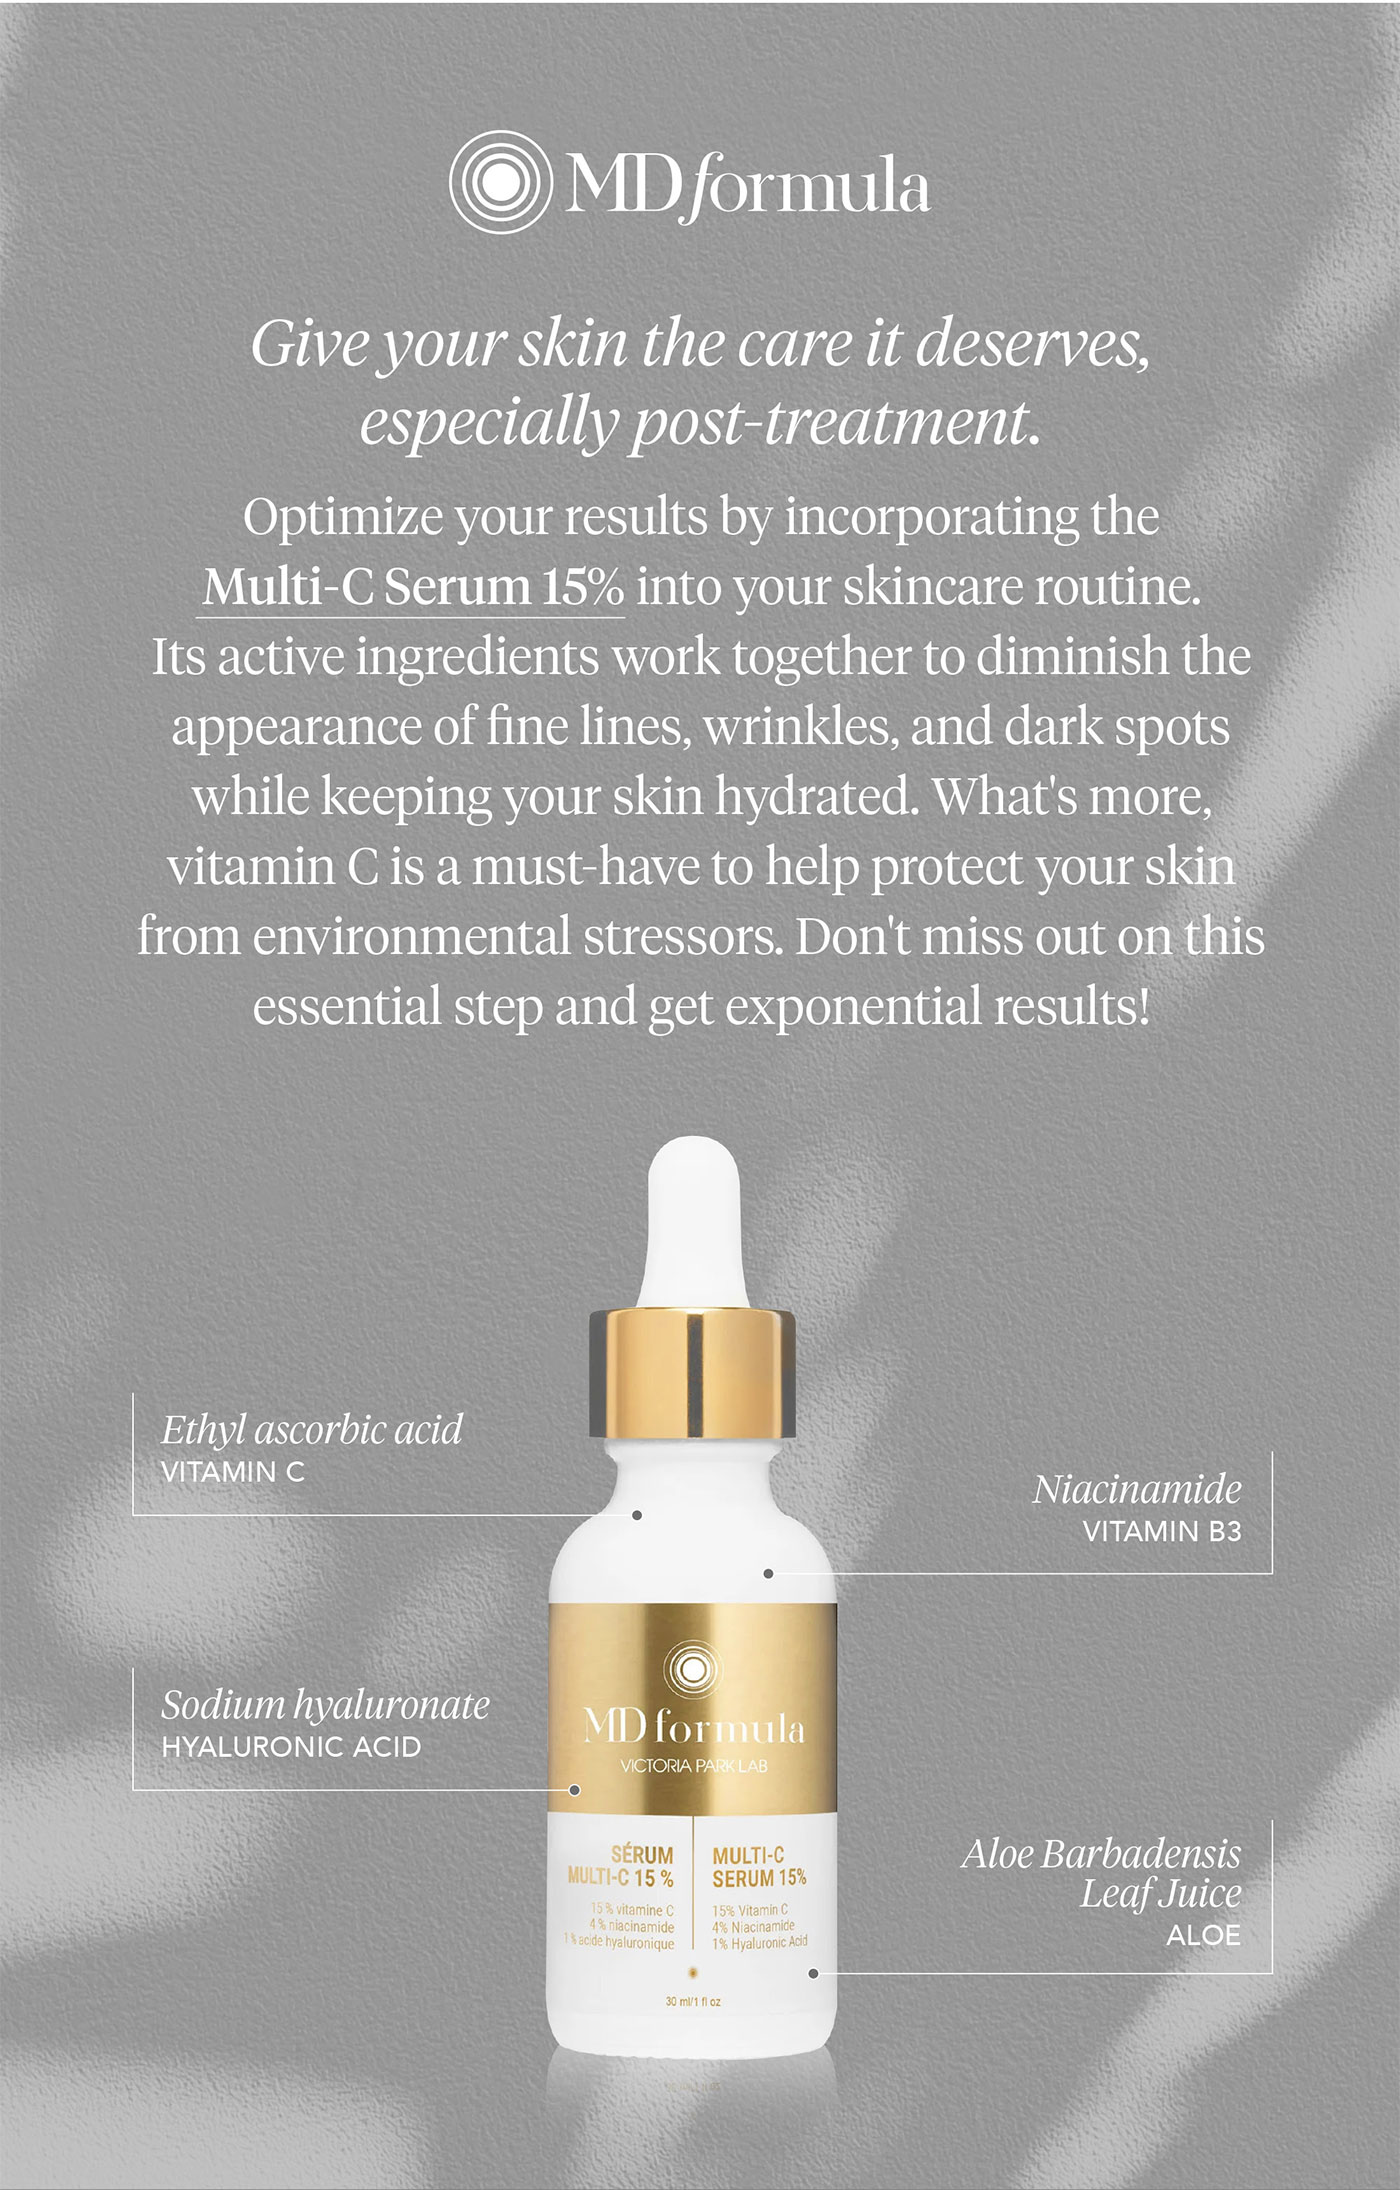 MDformula. GIve your skin the care it serves, especially post-treatment.